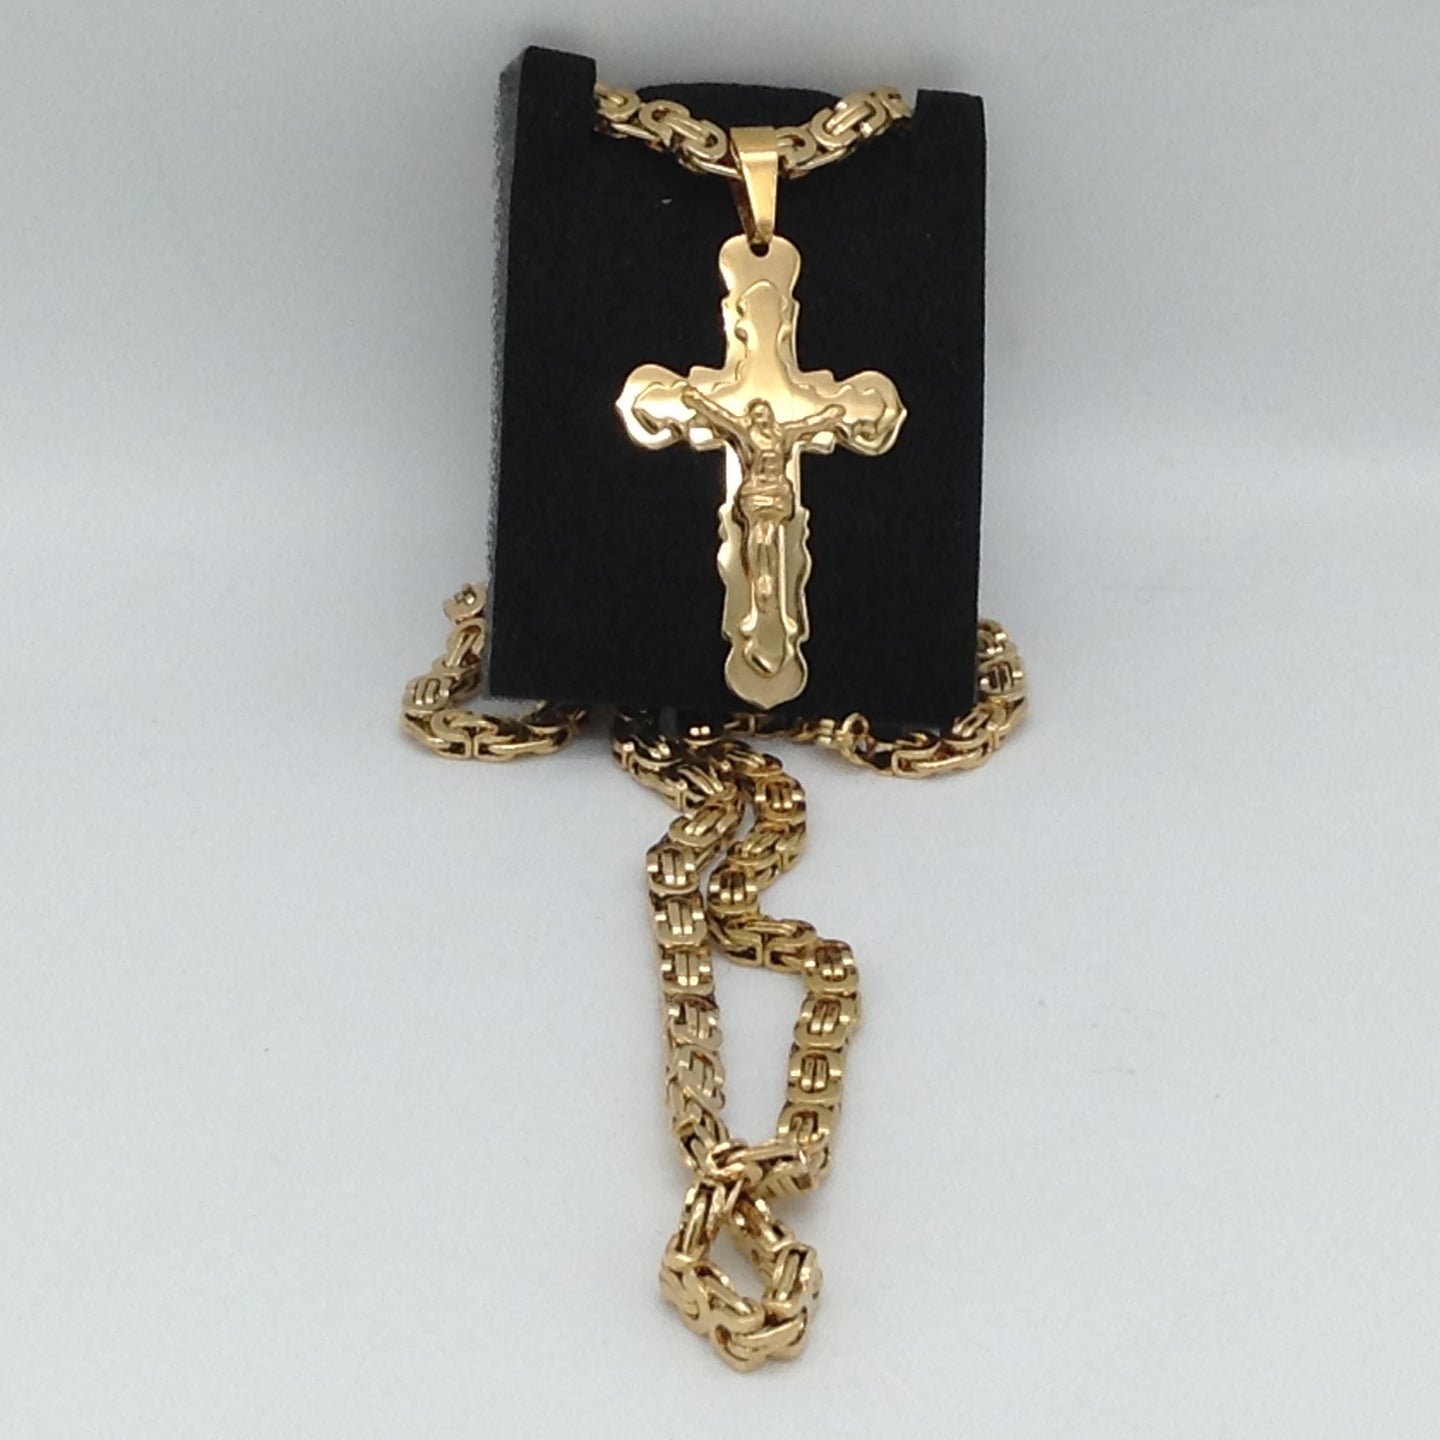 GOLD  PLATED  NECKLACE  WITH CROSS  PENDANT